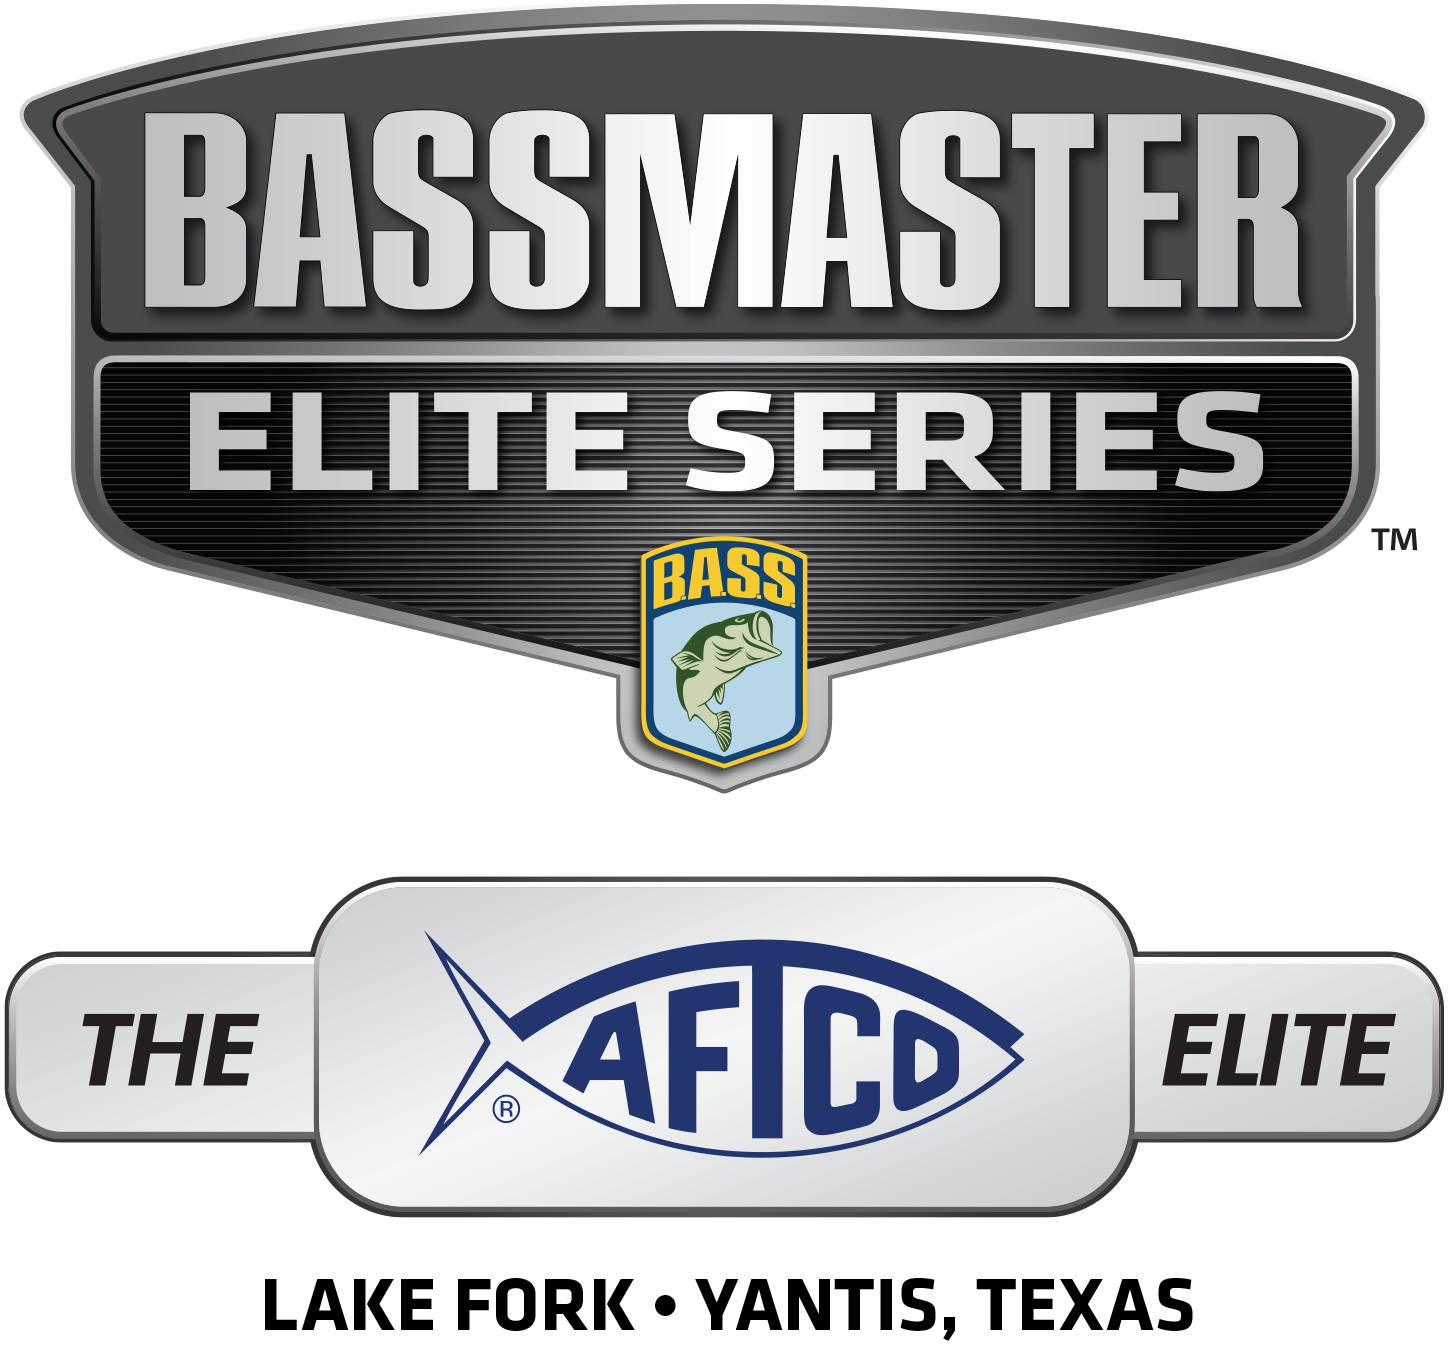 Ito takes early lead as giants emerge on Day 1 of the Bassmaster Elite